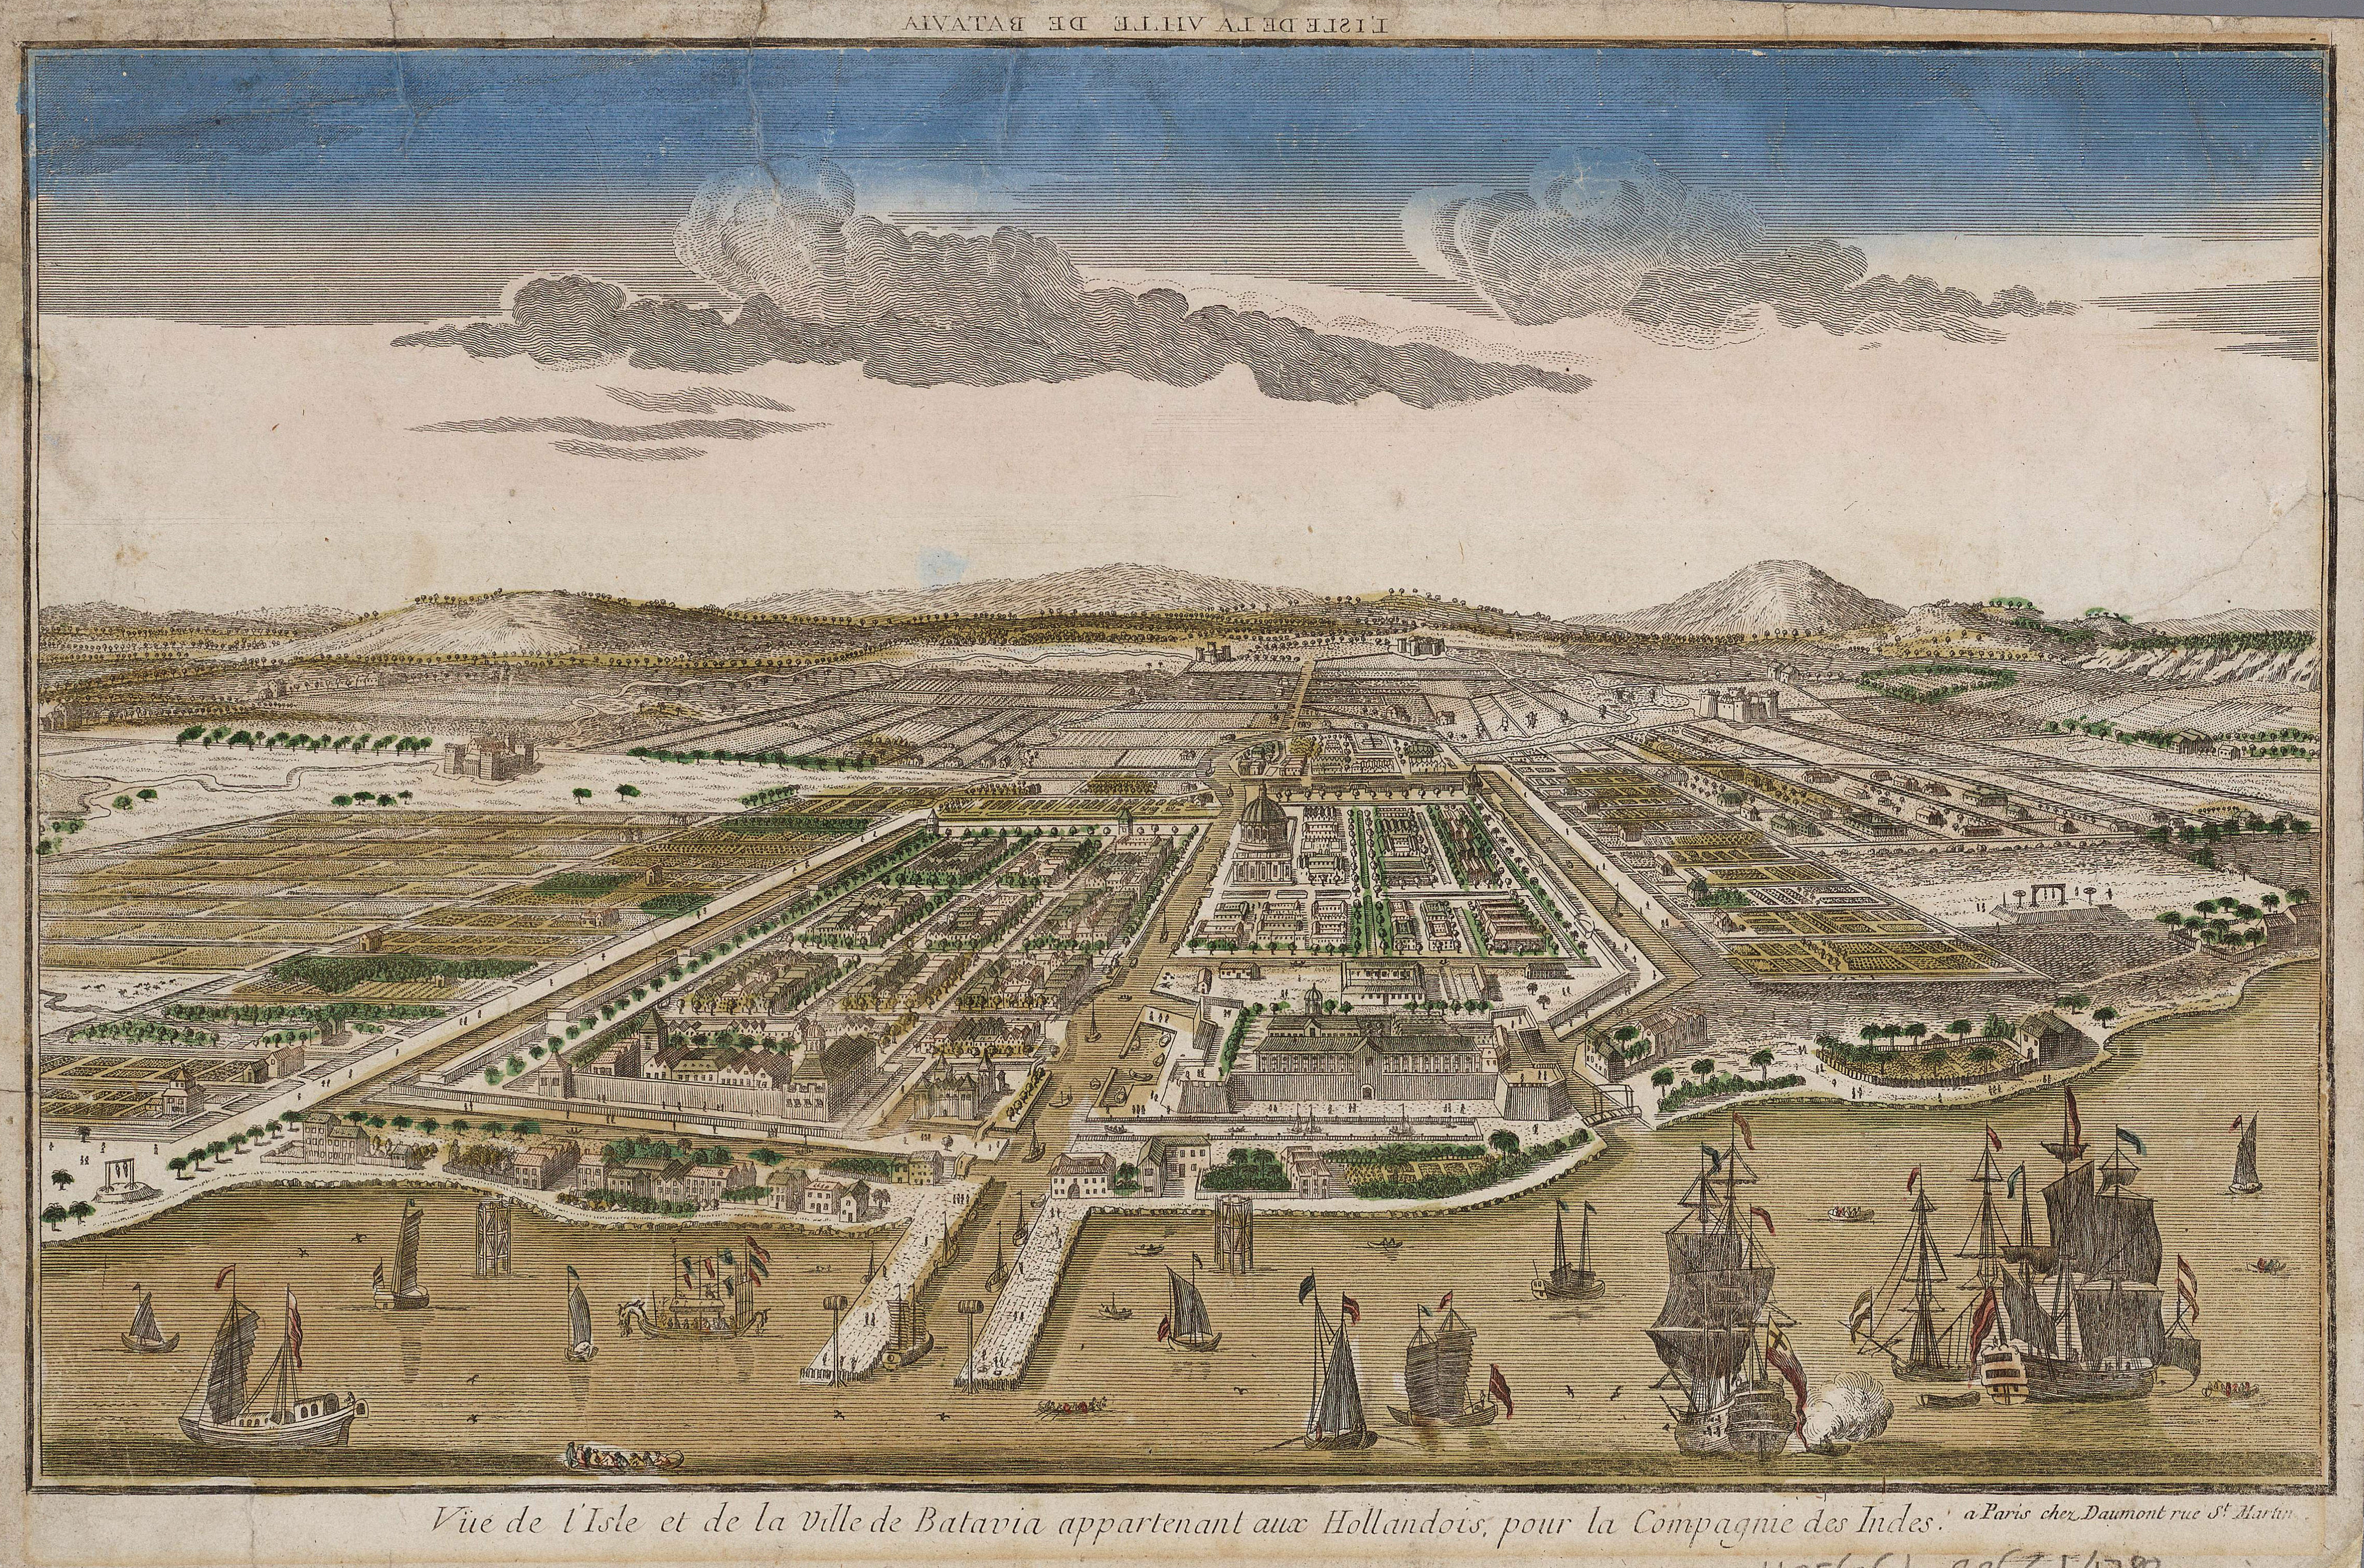 Image of Batavia, capital of the Dutch East Indies in what is now North Jakarta, circa 1780.